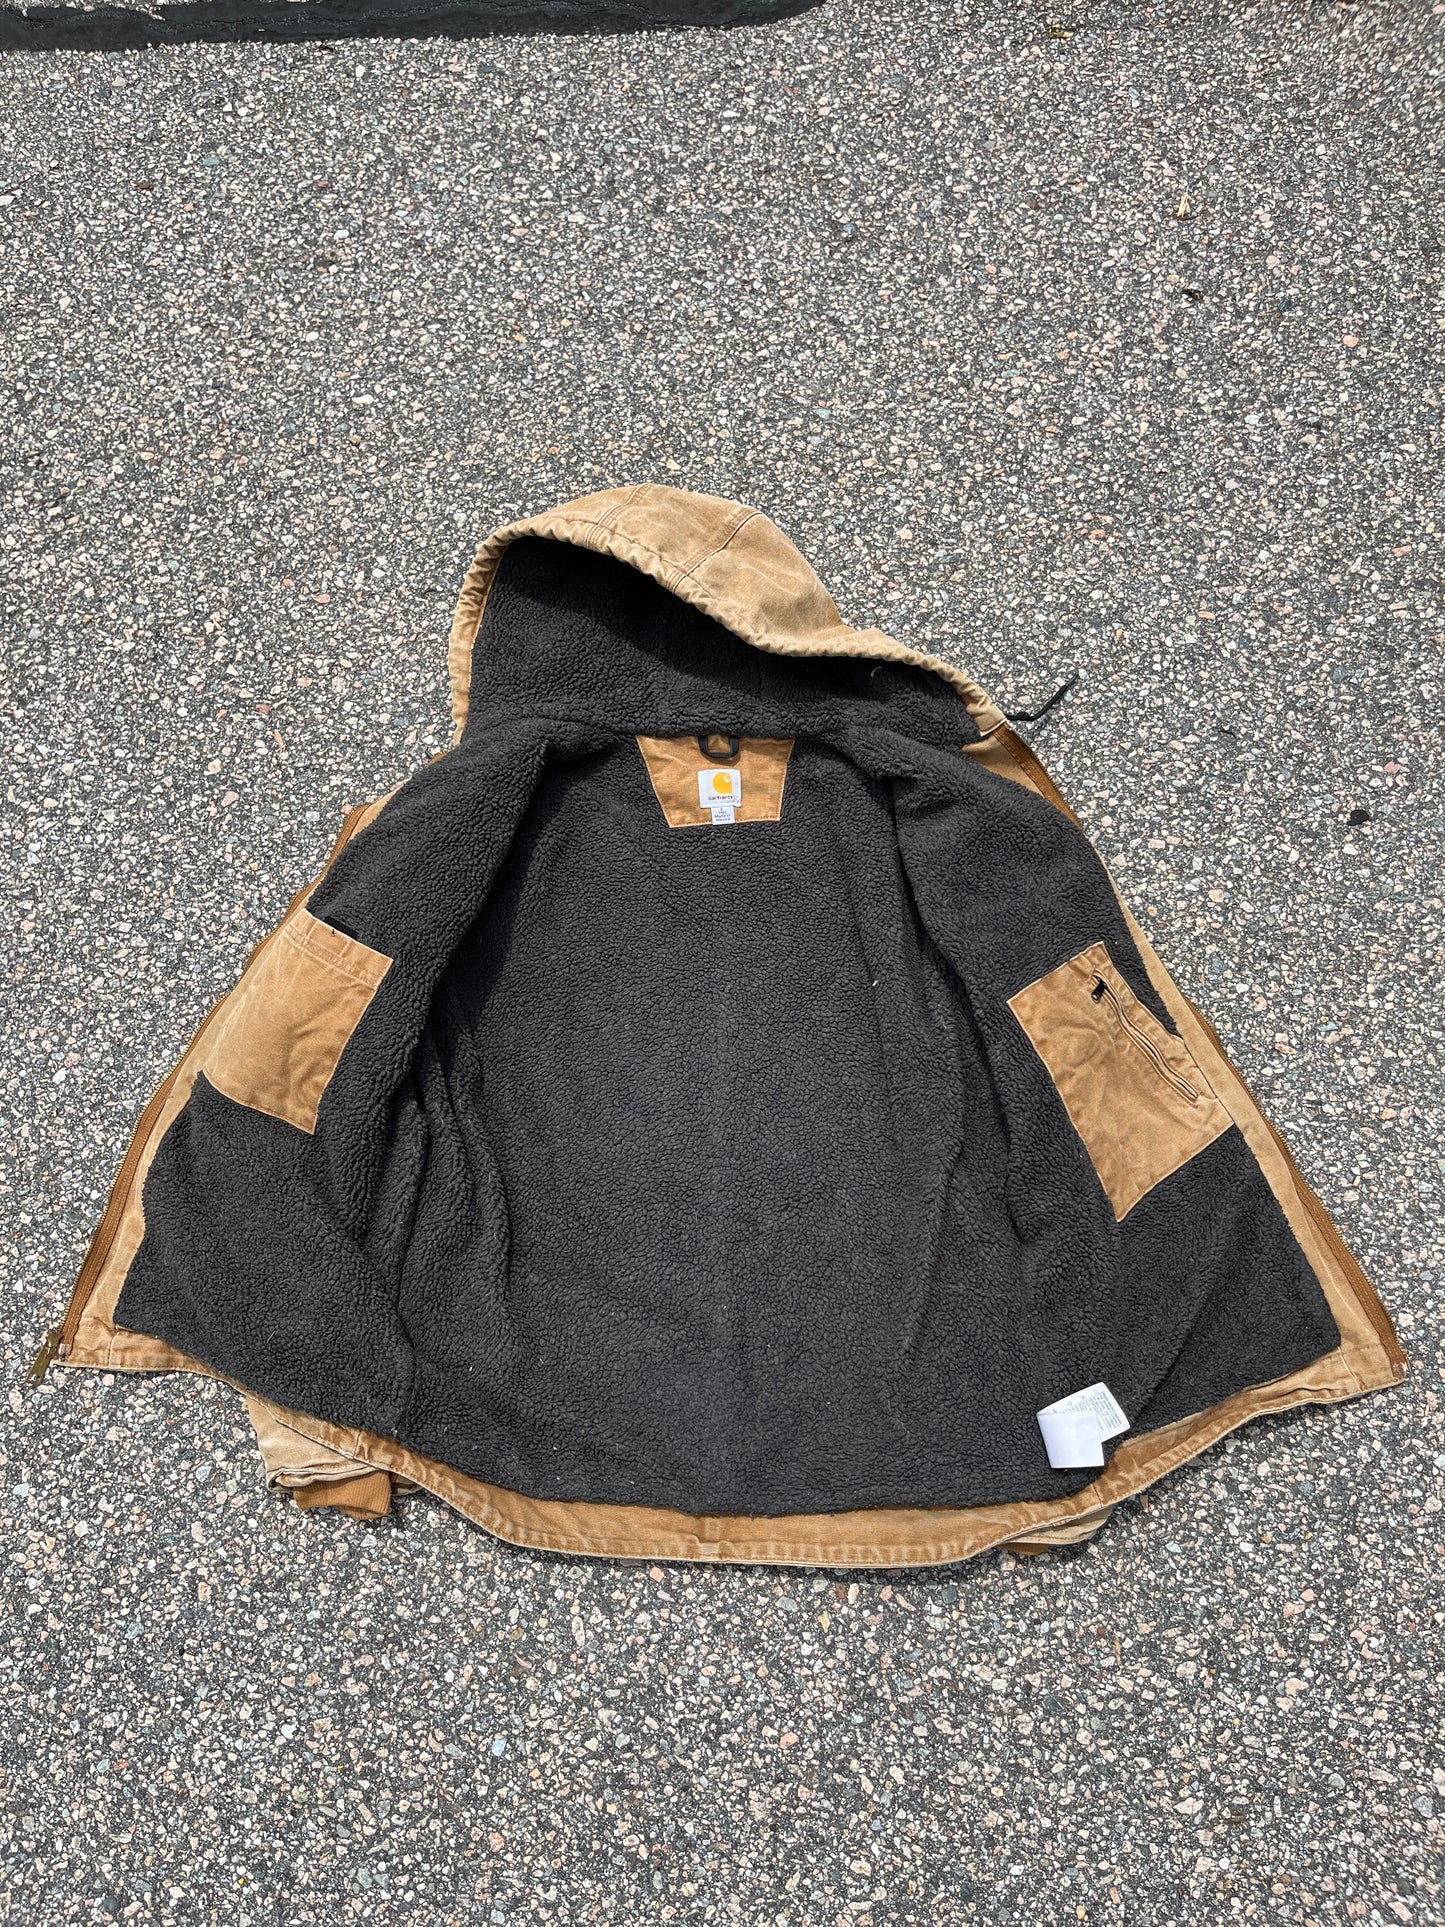 Faded Brown Sherpa Lined Carhartt Jacket - Large